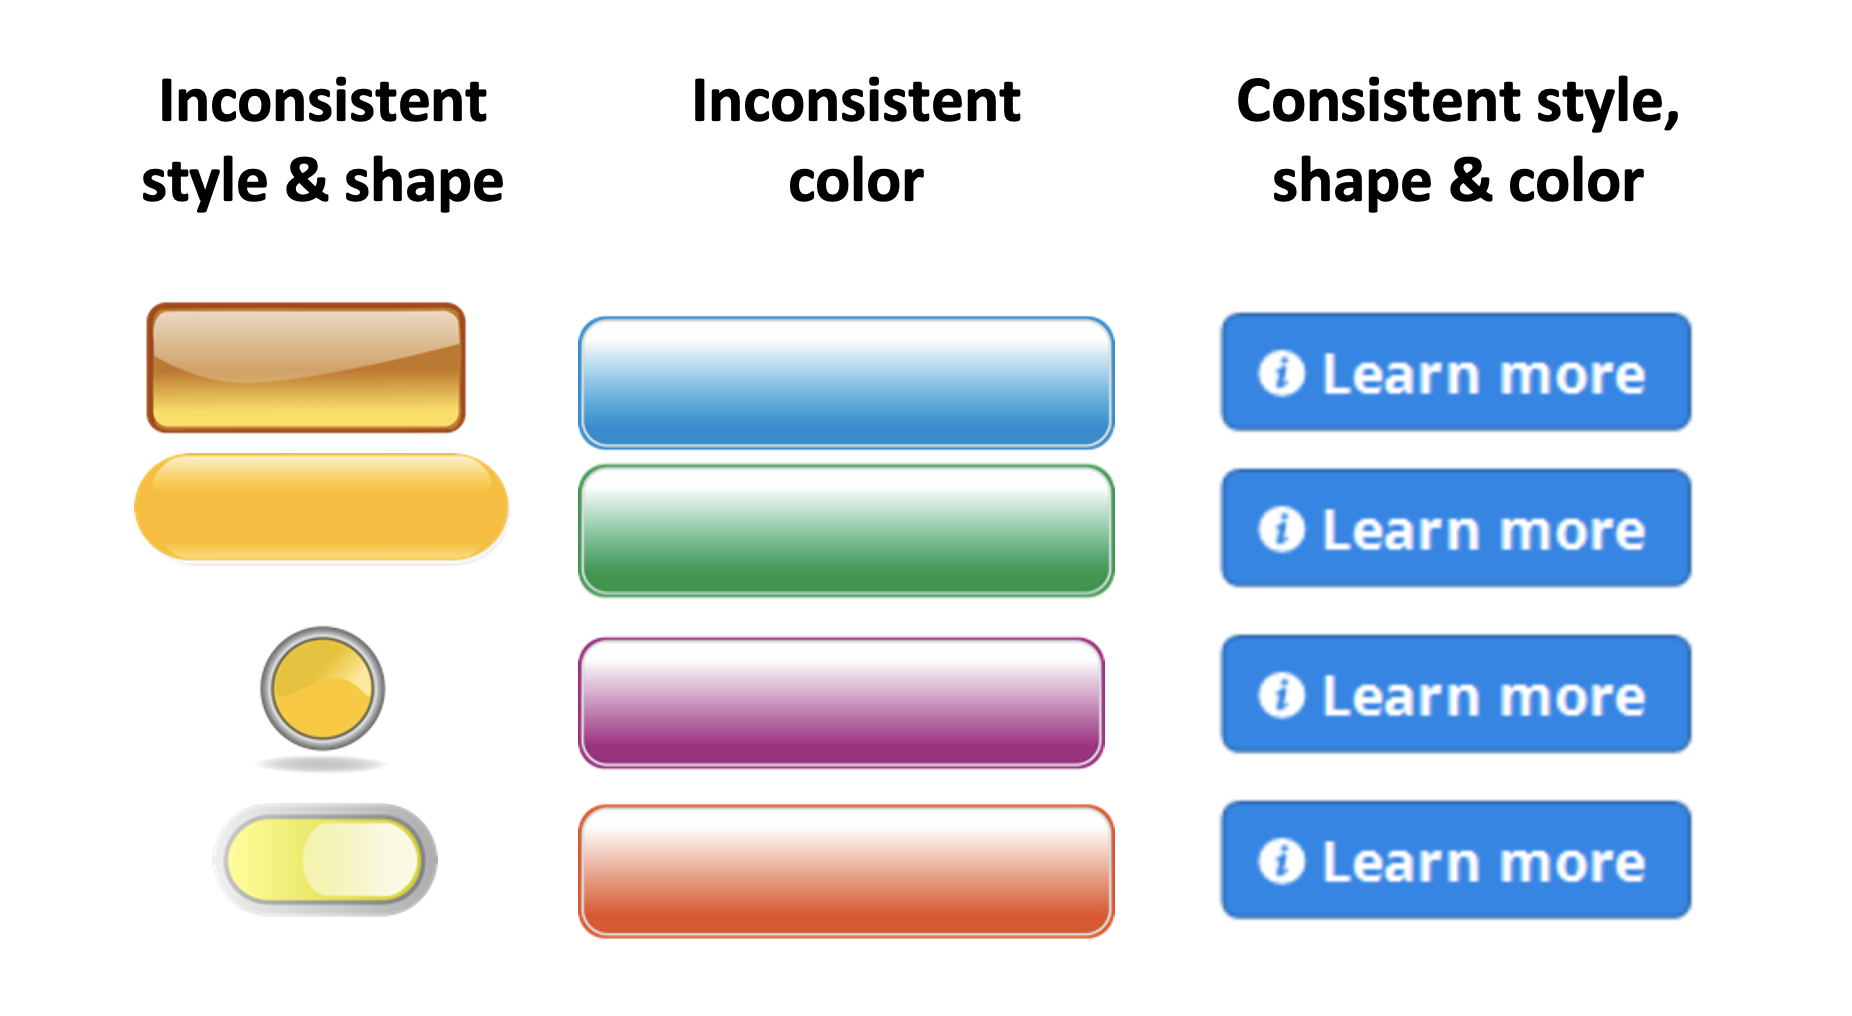 Inconsistent, and consistent size, color and shape of button styles